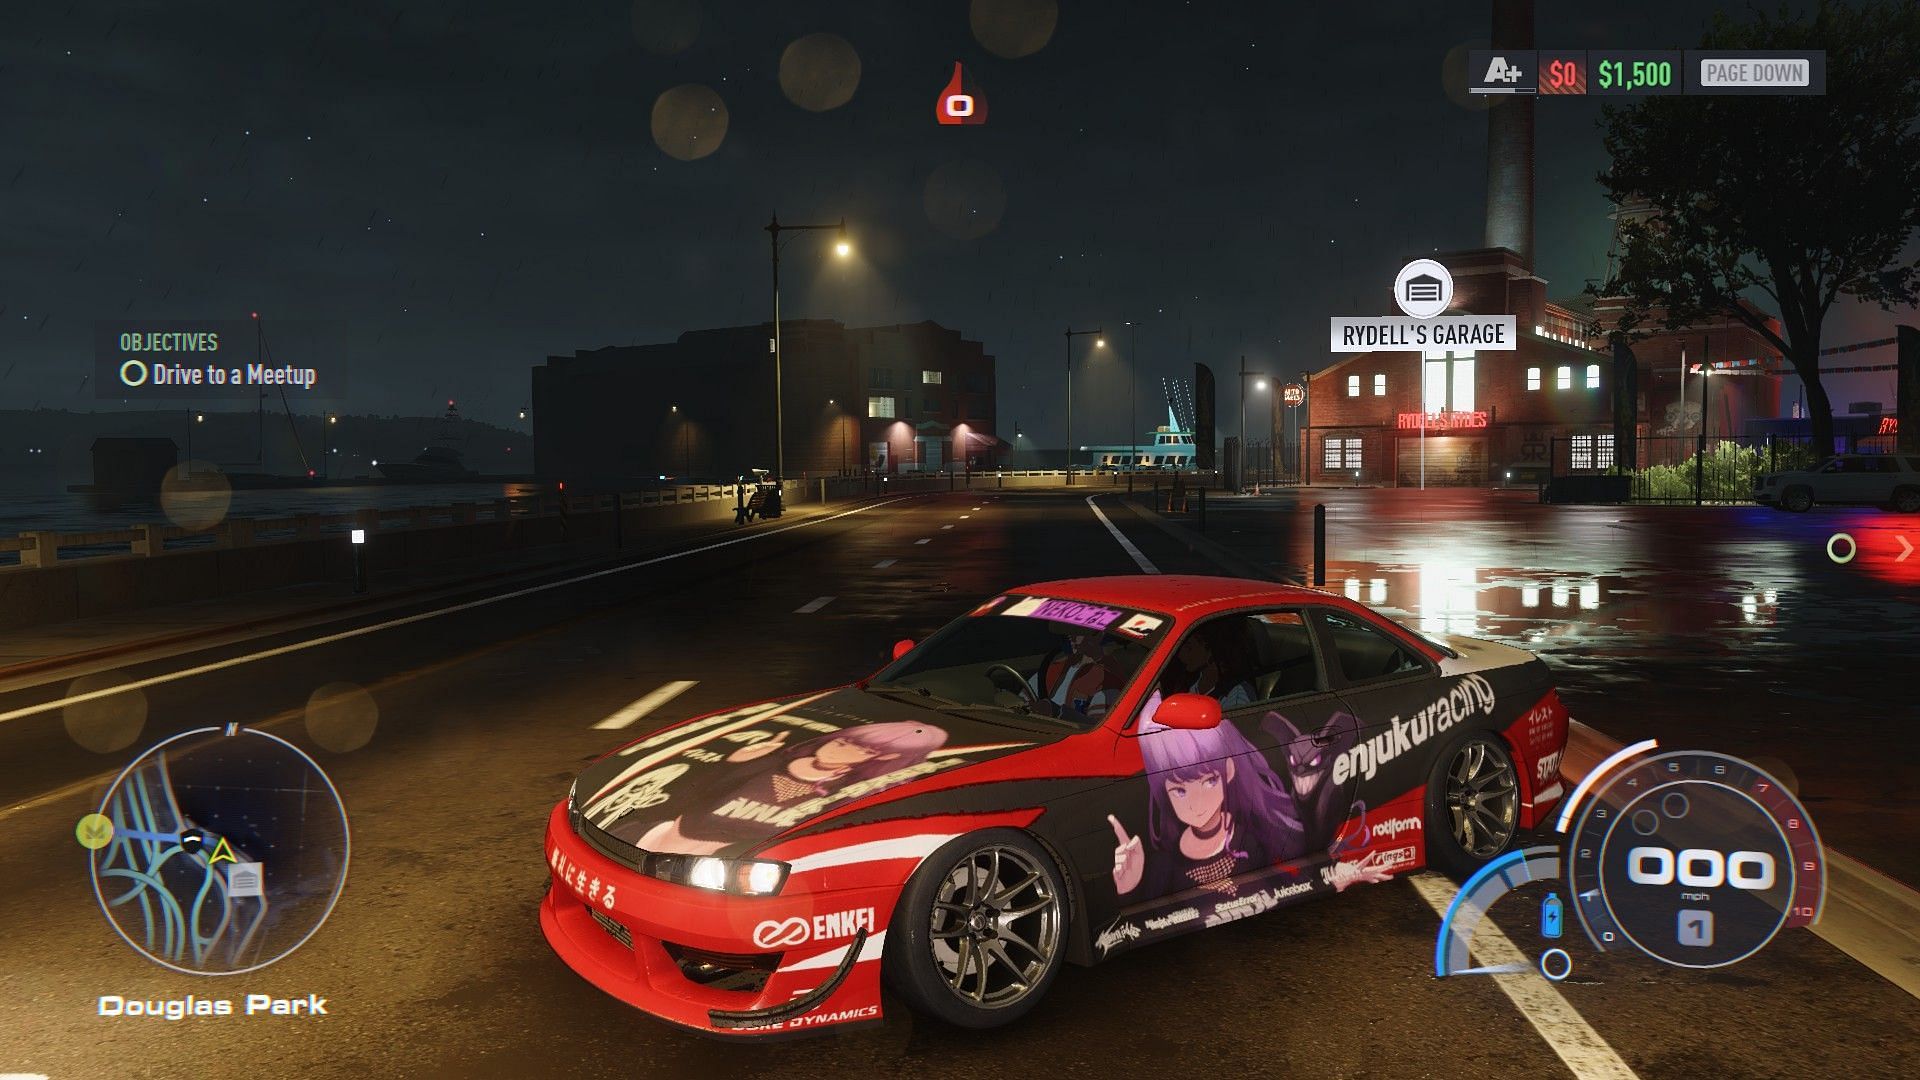 How To Play Need for Speed Unbound Early on PC, PS5, Xbox - GameRevolution